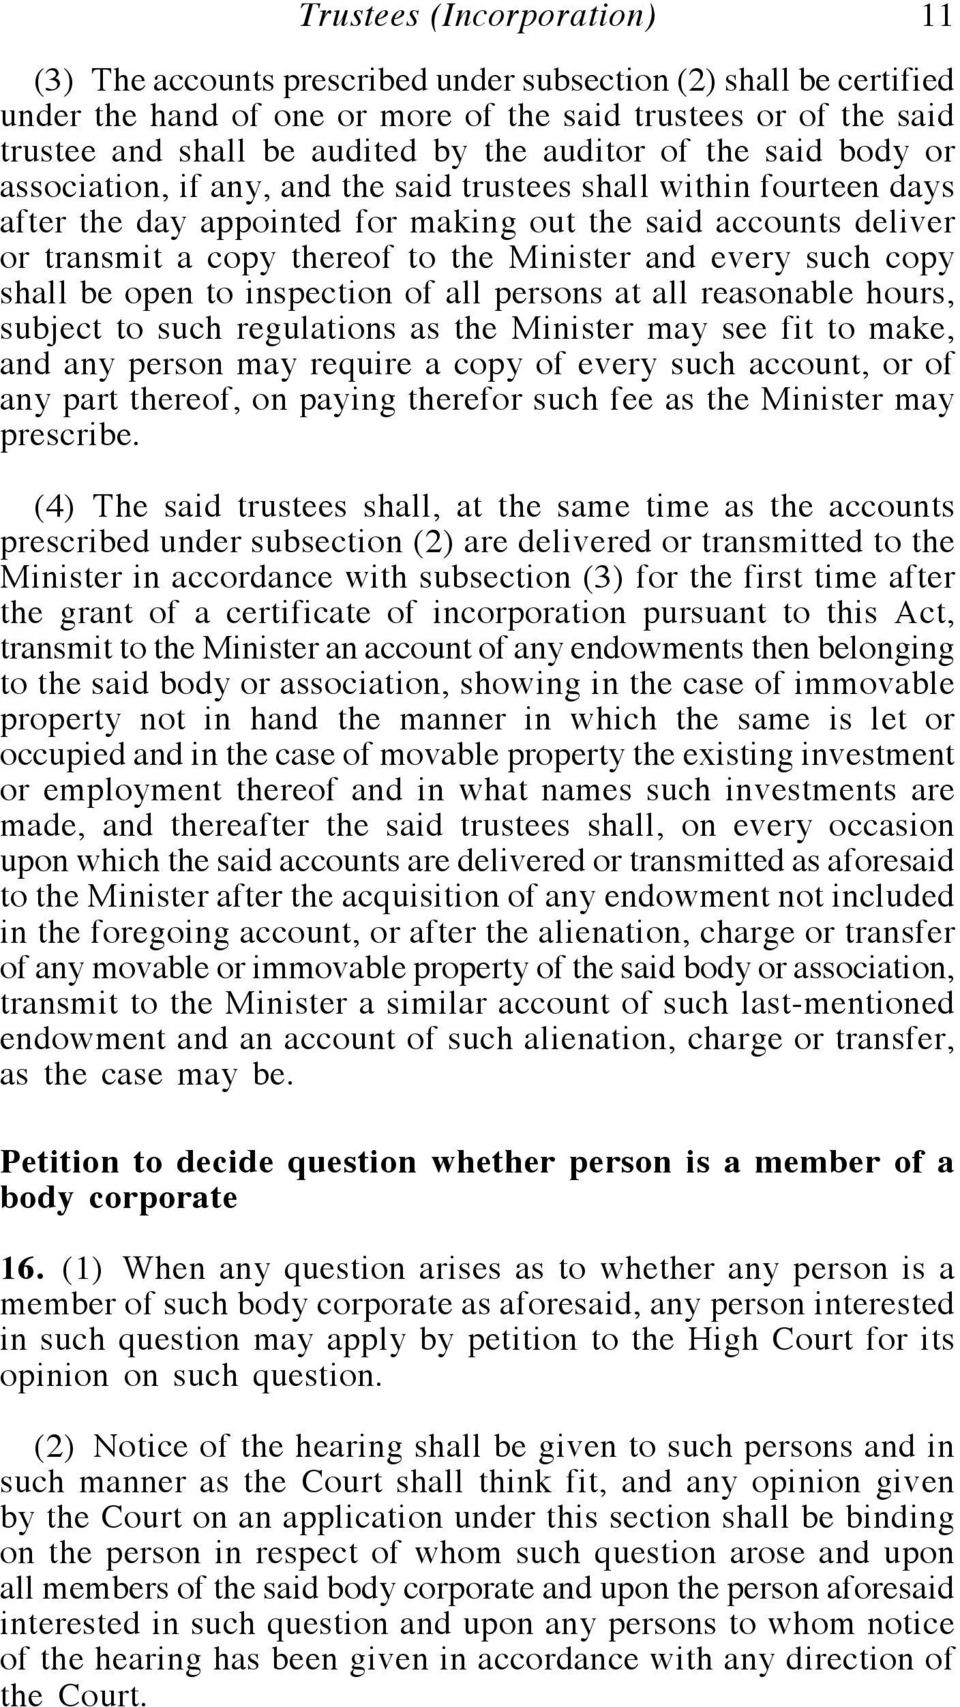 Minister and every such copy shall be open to inspection of all persons at all reasonable hours, subject to such regulations as the Minister may see fit to make, and any person may require a copy of